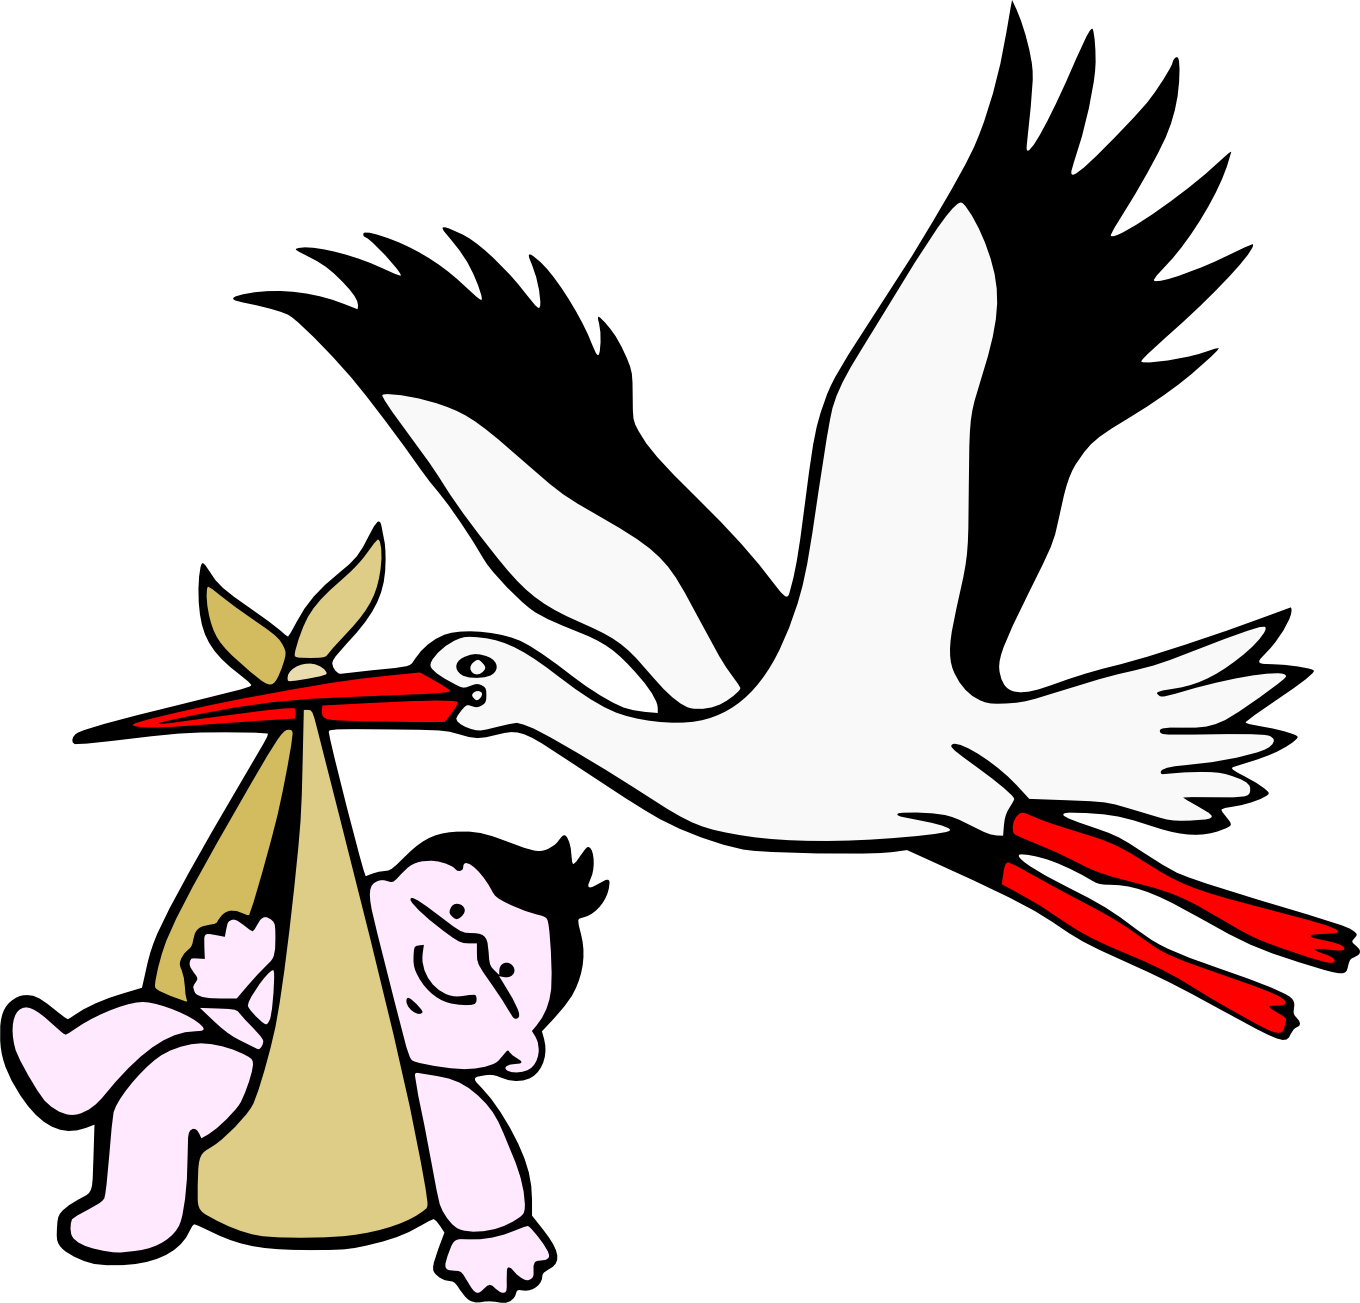 Stork with new-born child.png